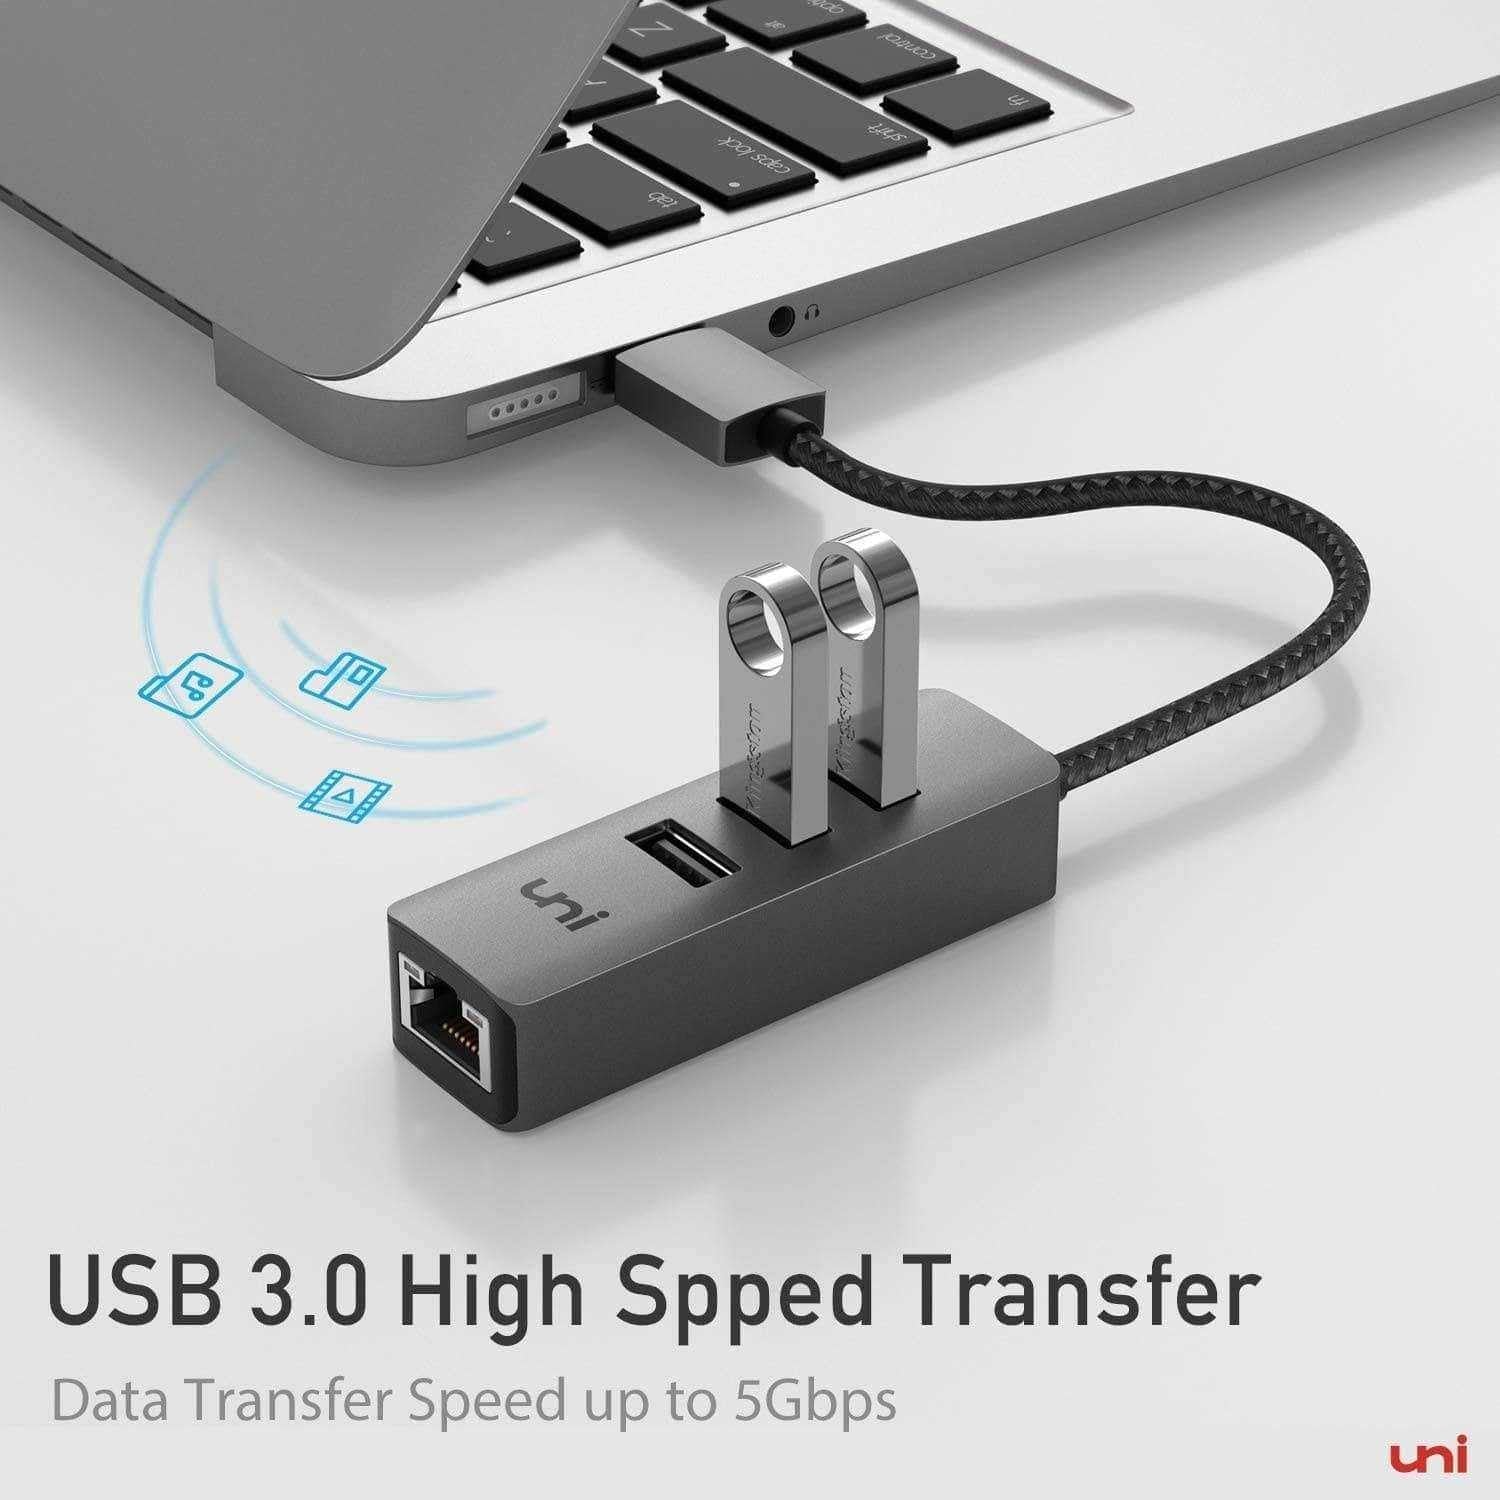  USB 3.0 to Ethernet Adapter 4 in 1 Multiport Hub with